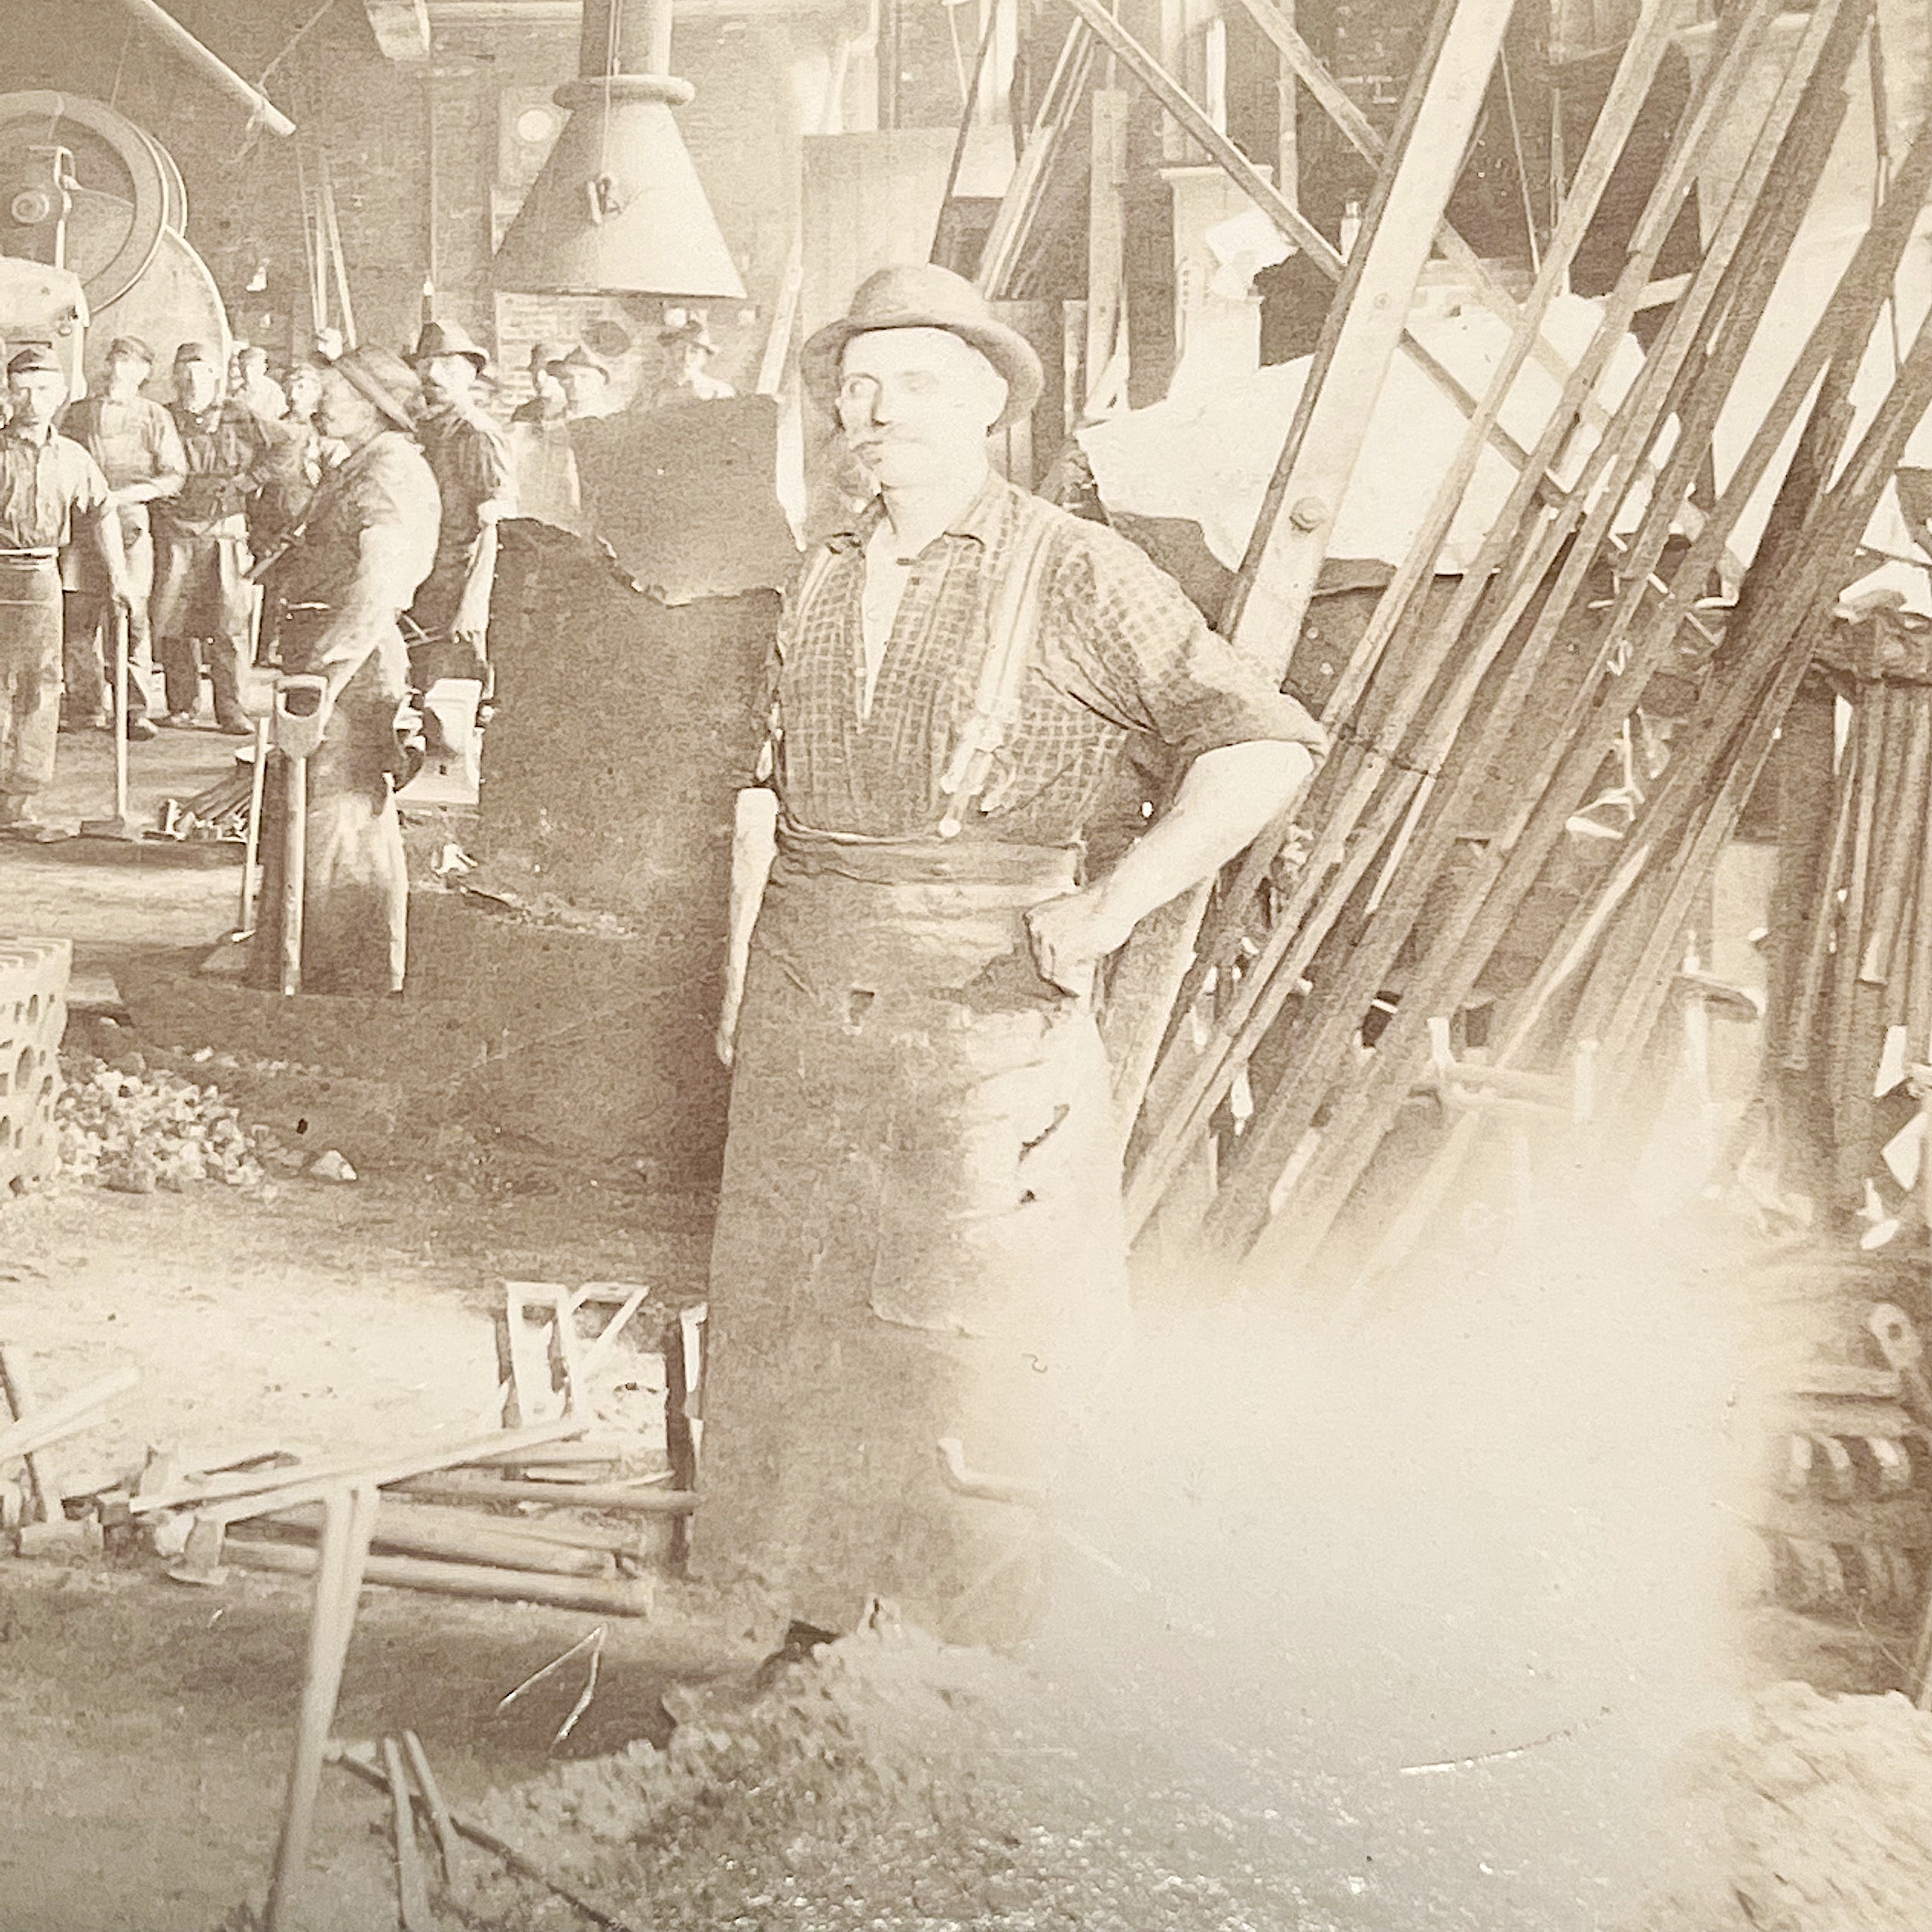 Antique Photograph of Blacksmith Workshop | Early 1900s